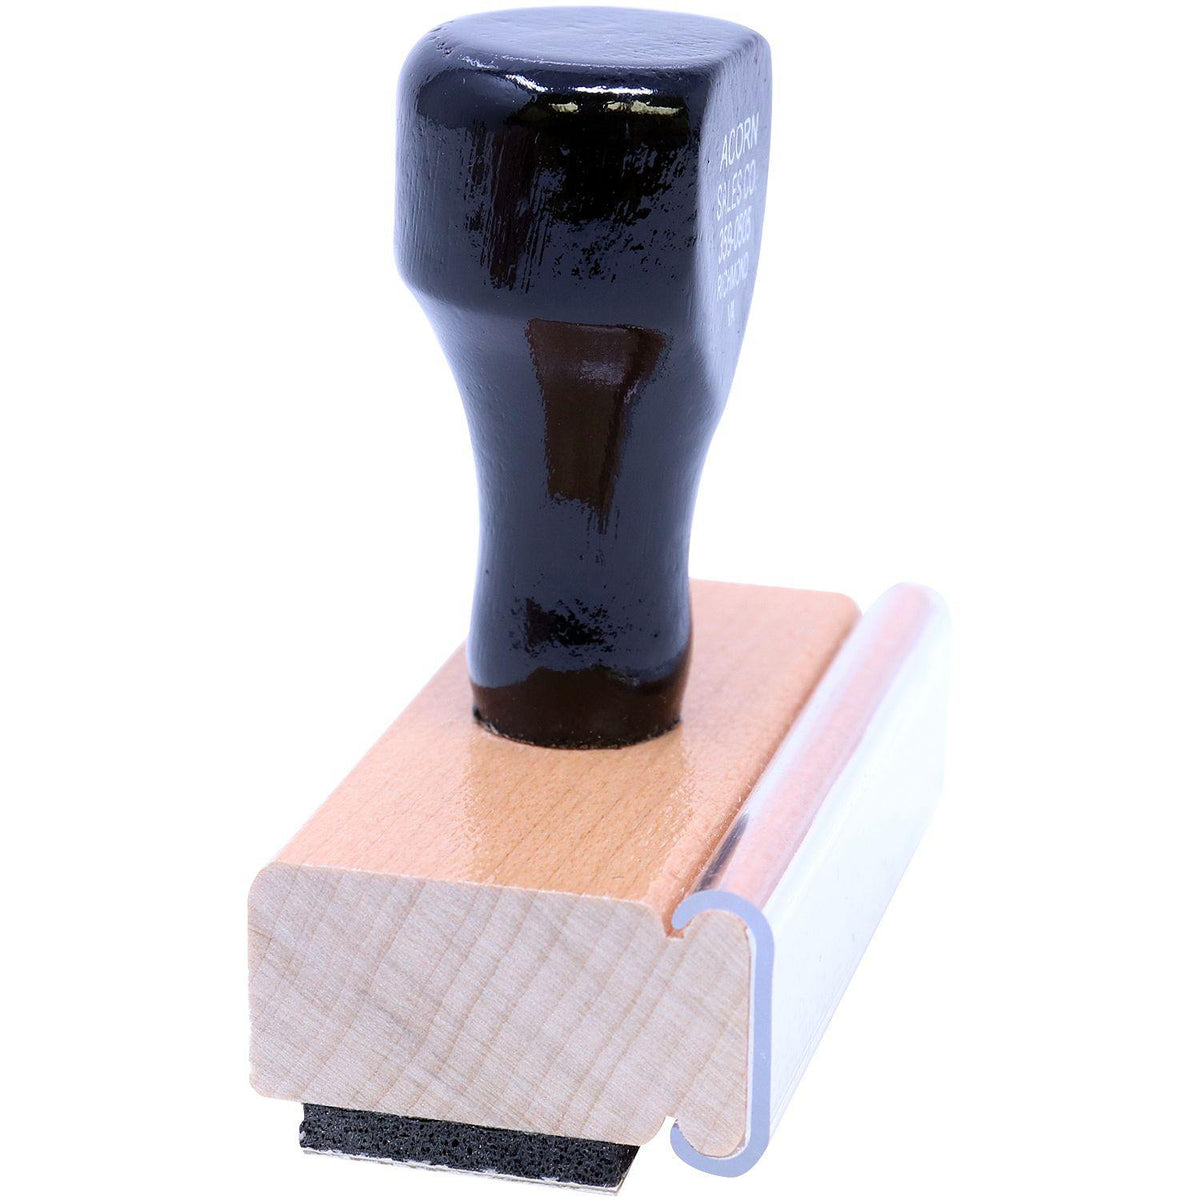 Side View of Large Lunch Money Due Rubber Stamp at an Angle